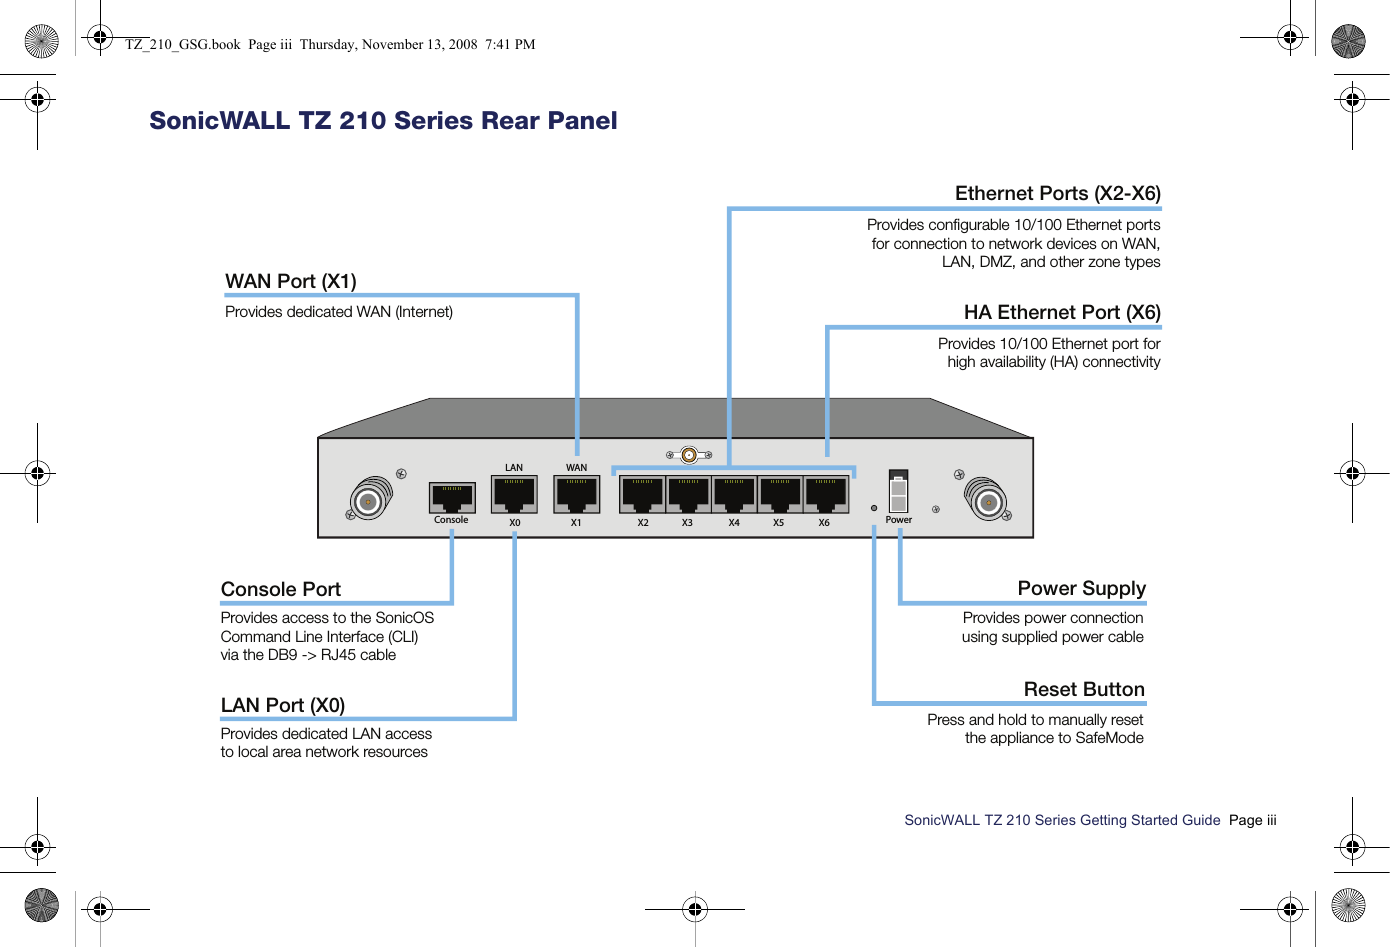 SonicWALL TZ 210 Series Getting Started Guide  Page iiiSonicWALL TZ 210 Series Rear PanelX3 X4 X5 X6X2WANX1X0LANConsole PowerConsole PortProvides access to the SonicOS Command Line Interface (CLI) via the DB9 -&gt; RJ45 cableLAN Port (X0)Provides dedicated LAN access to local area network resourcesWAN Port (X1)Provides dedicated WAN (Internet) Power SupplyProvides power connection using supplied power cableReset ButtonPress and hold to manually reset the appliance to SafeModeEthernet Ports (X2-X6)Provides conﬁgurable 10/100 Ethernet ports for connection to network devices on WAN, LAN, DMZ, and other zone typesHA Ethernet Port (X6)Provides 10/100 Ethernet port for high availability (HA) connectivityTZ_210_GSG.book  Page iii  Thursday, November 13, 2008  7:41 PM